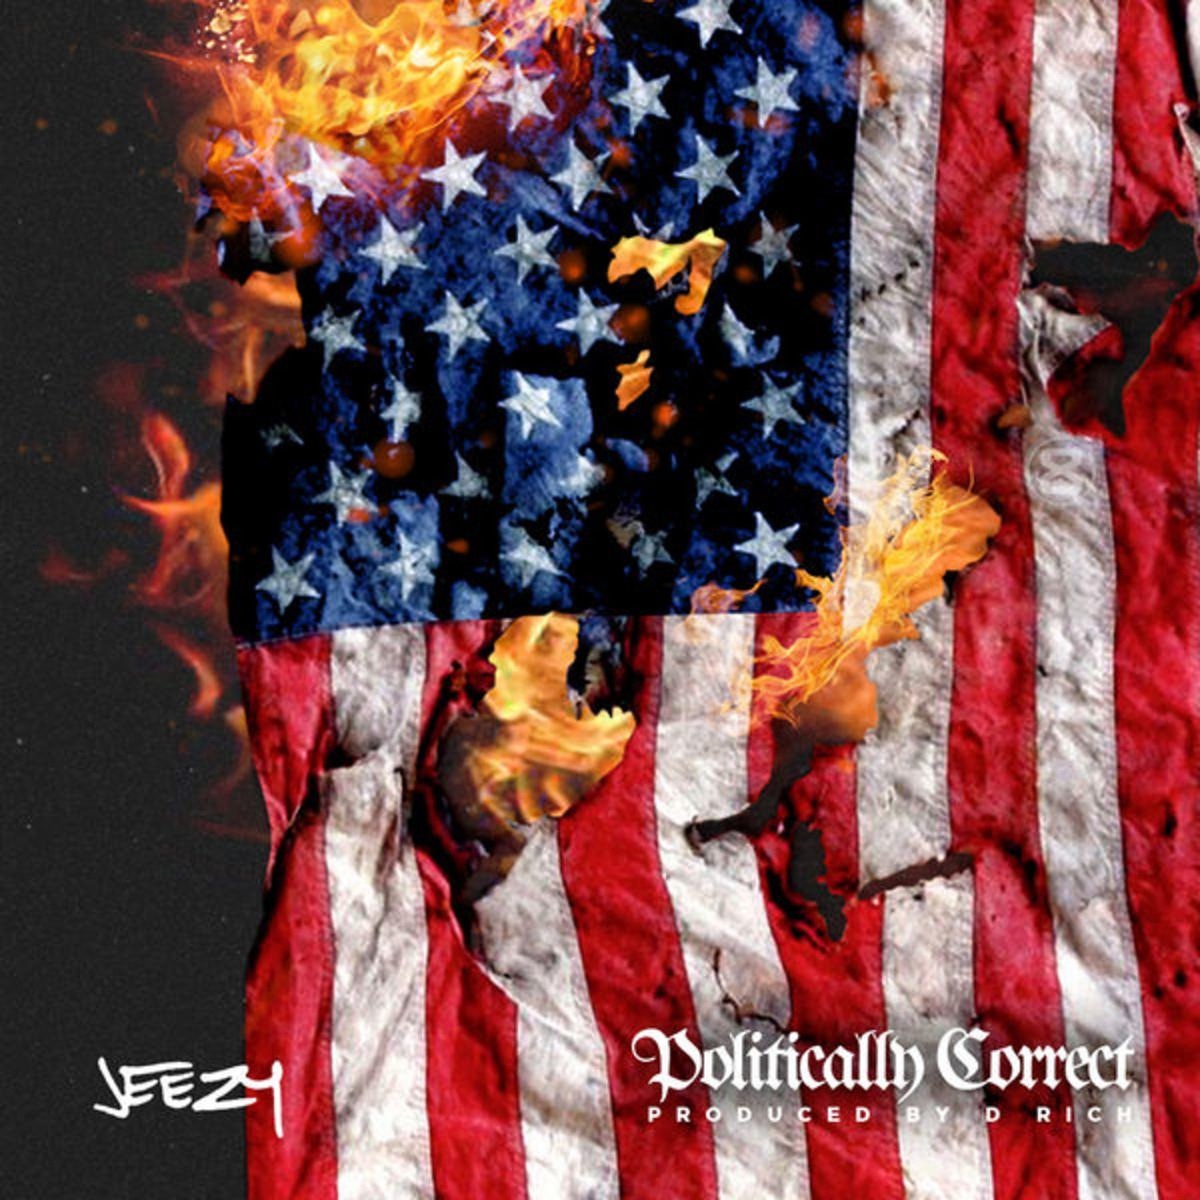 Politically Correct - EP - Album by Jeezy - Apple Music